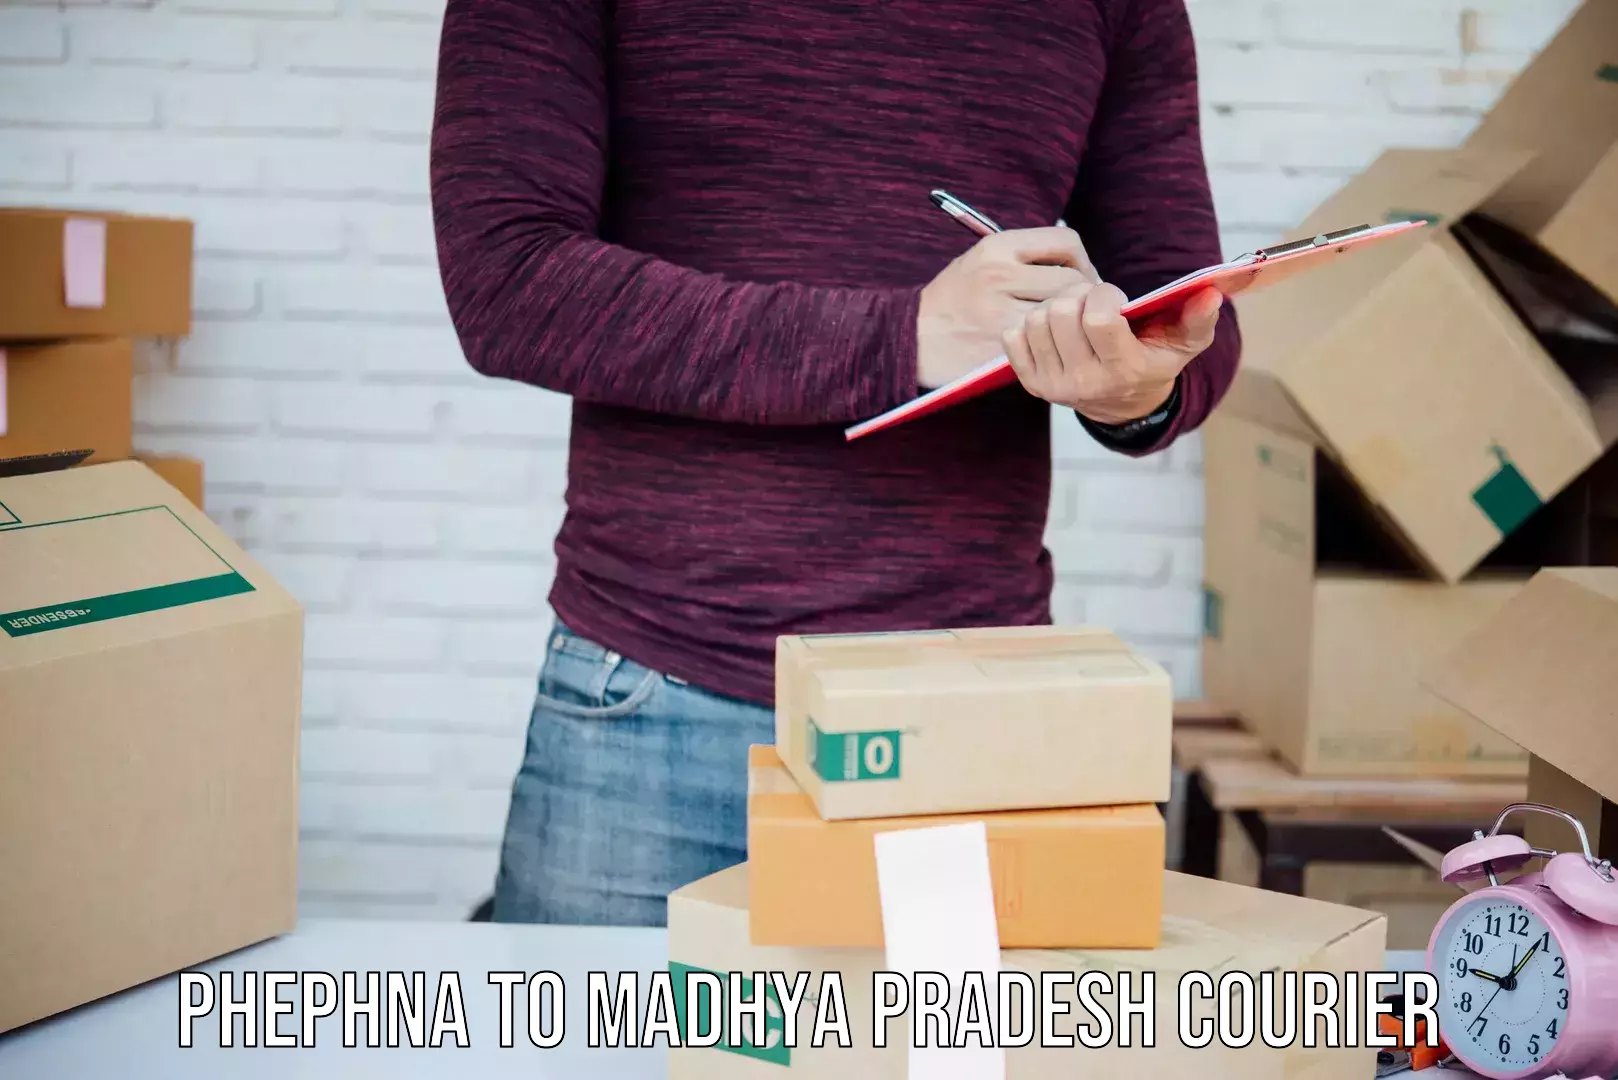 Courier service booking in Phephna to Amarkantak